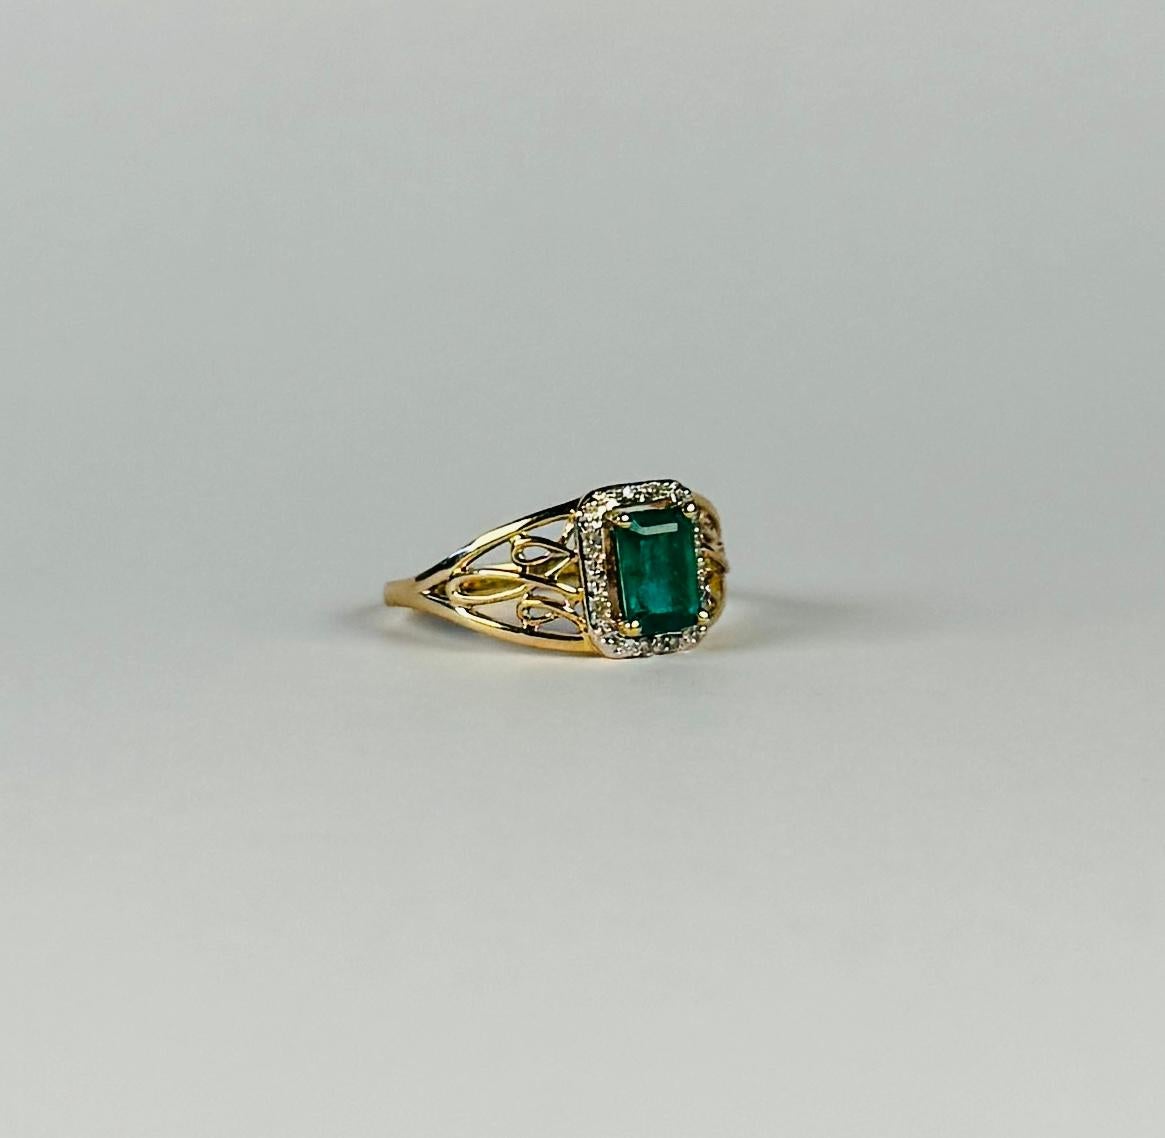 European Ring 14 carat gold with faceted smaragd surrounded with diamonds For Sale 4